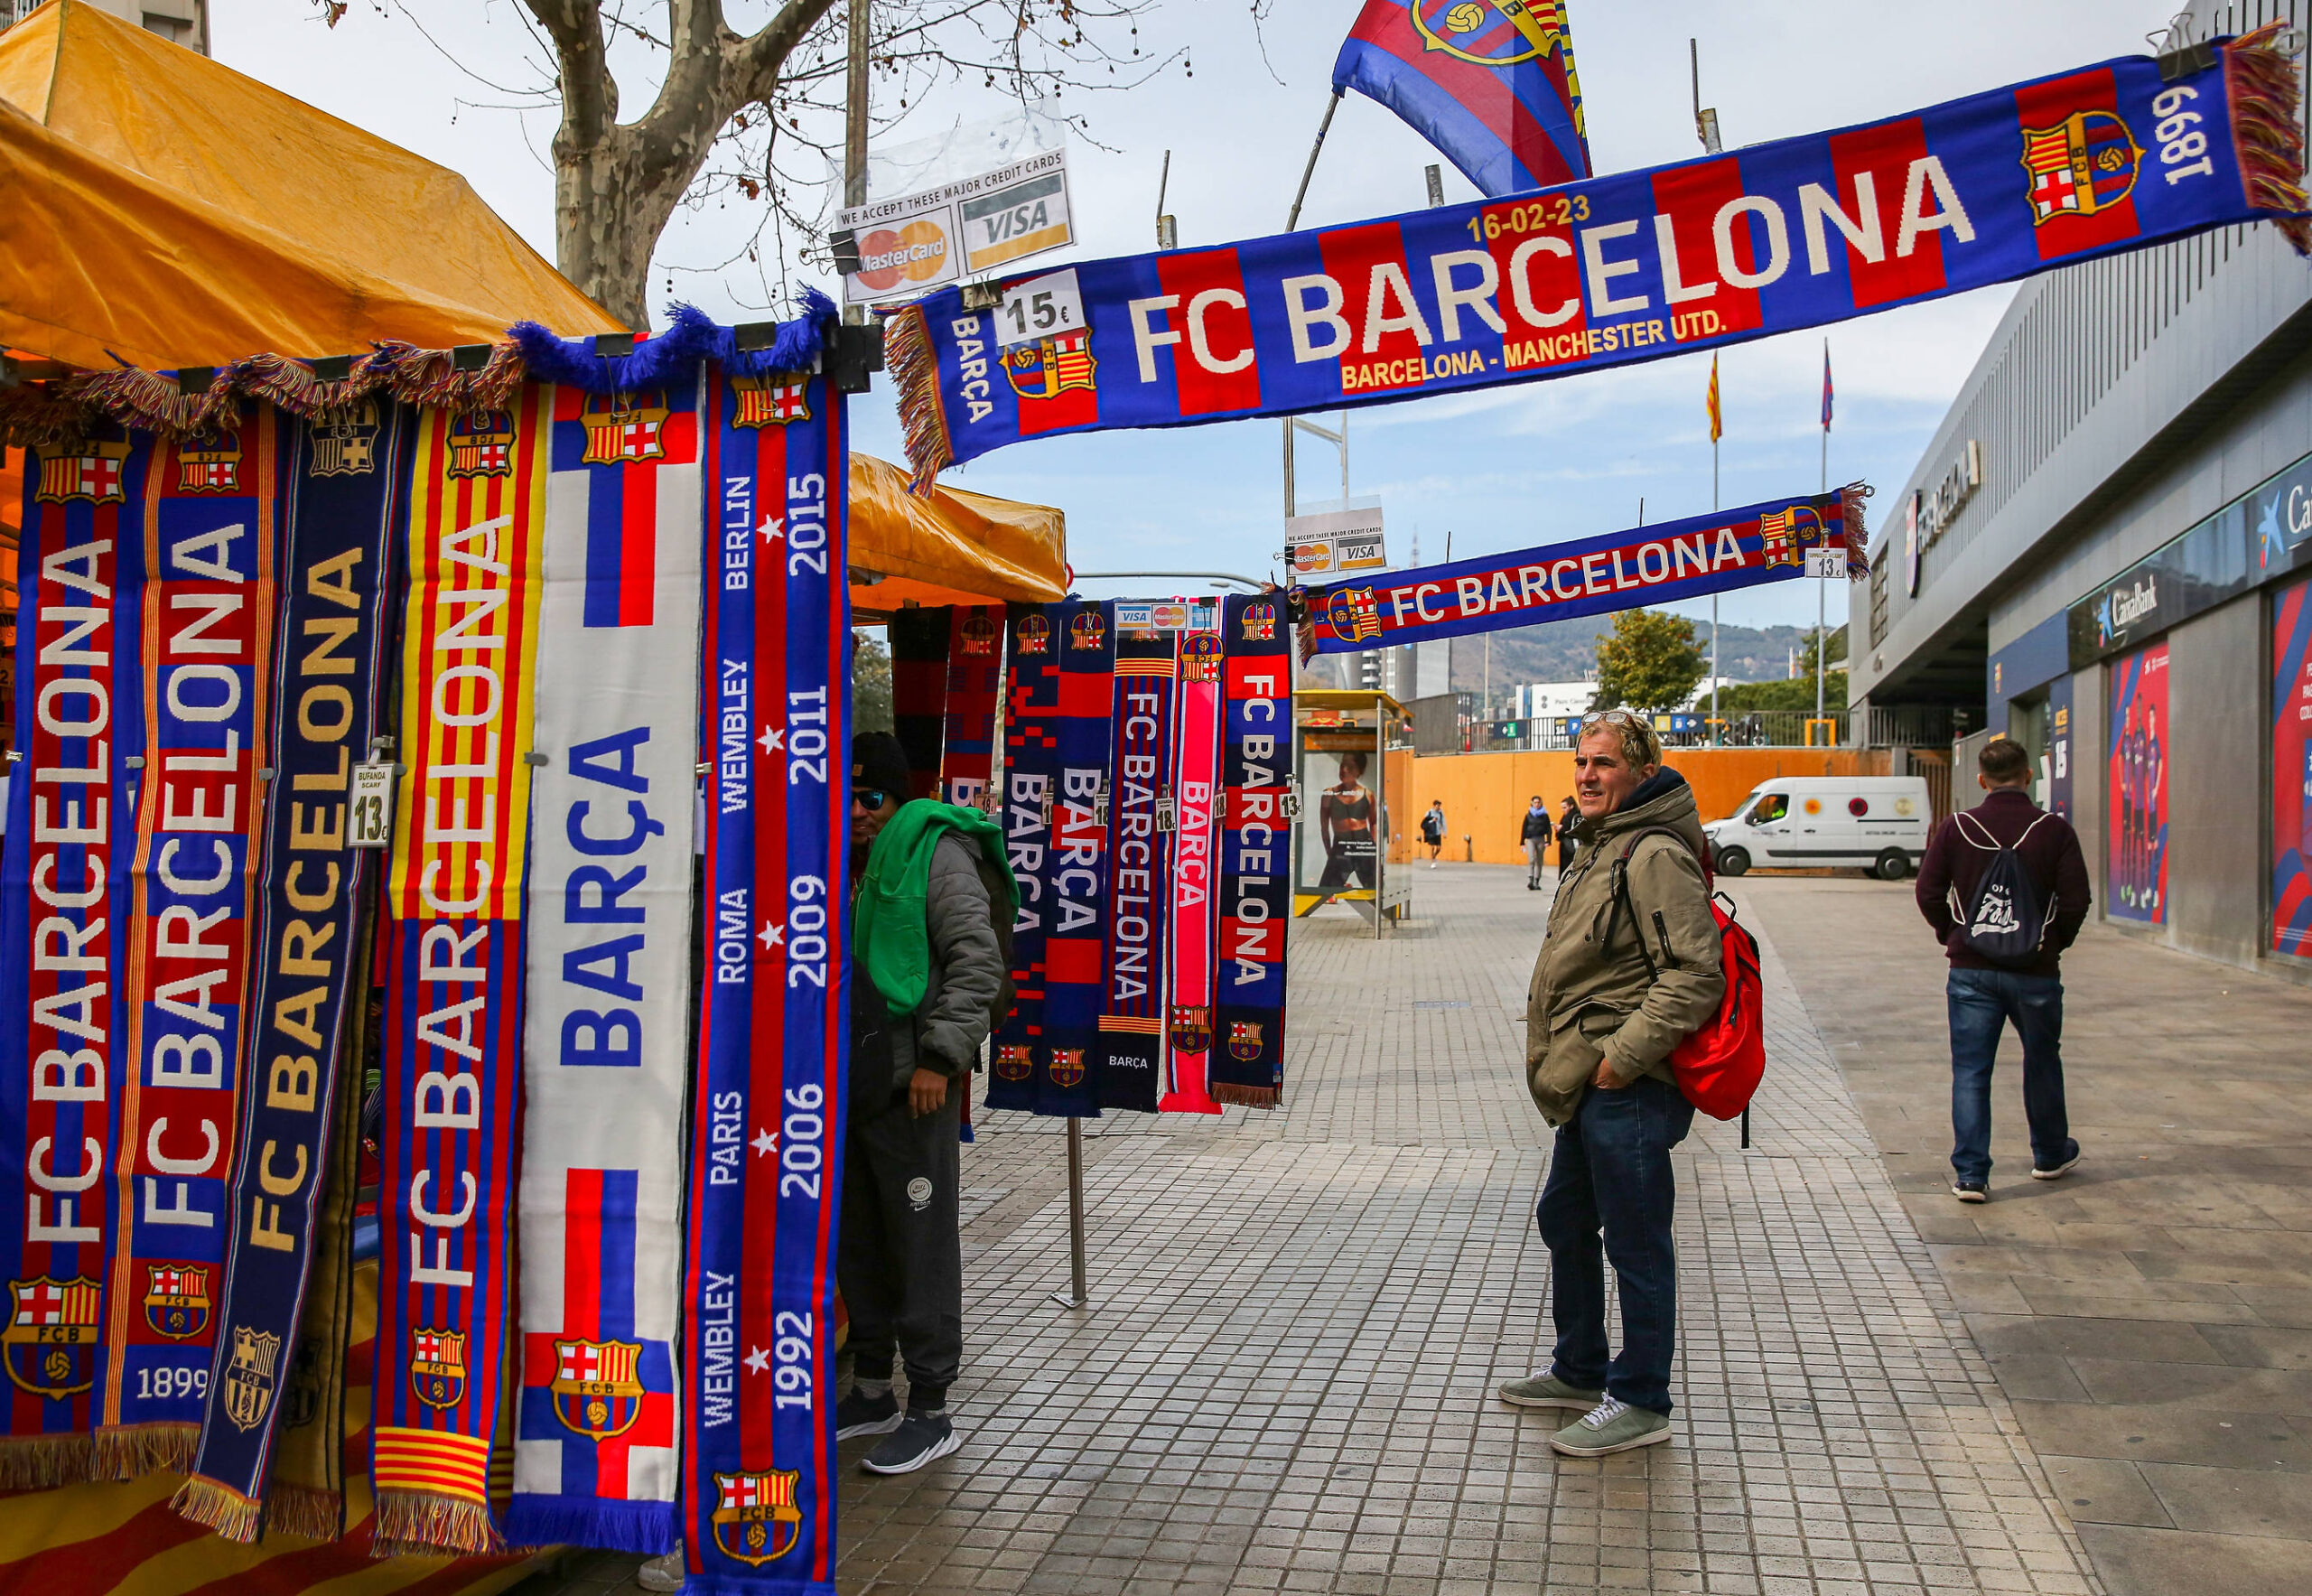 Barcelona, General View outside Camp, scarf seller stall